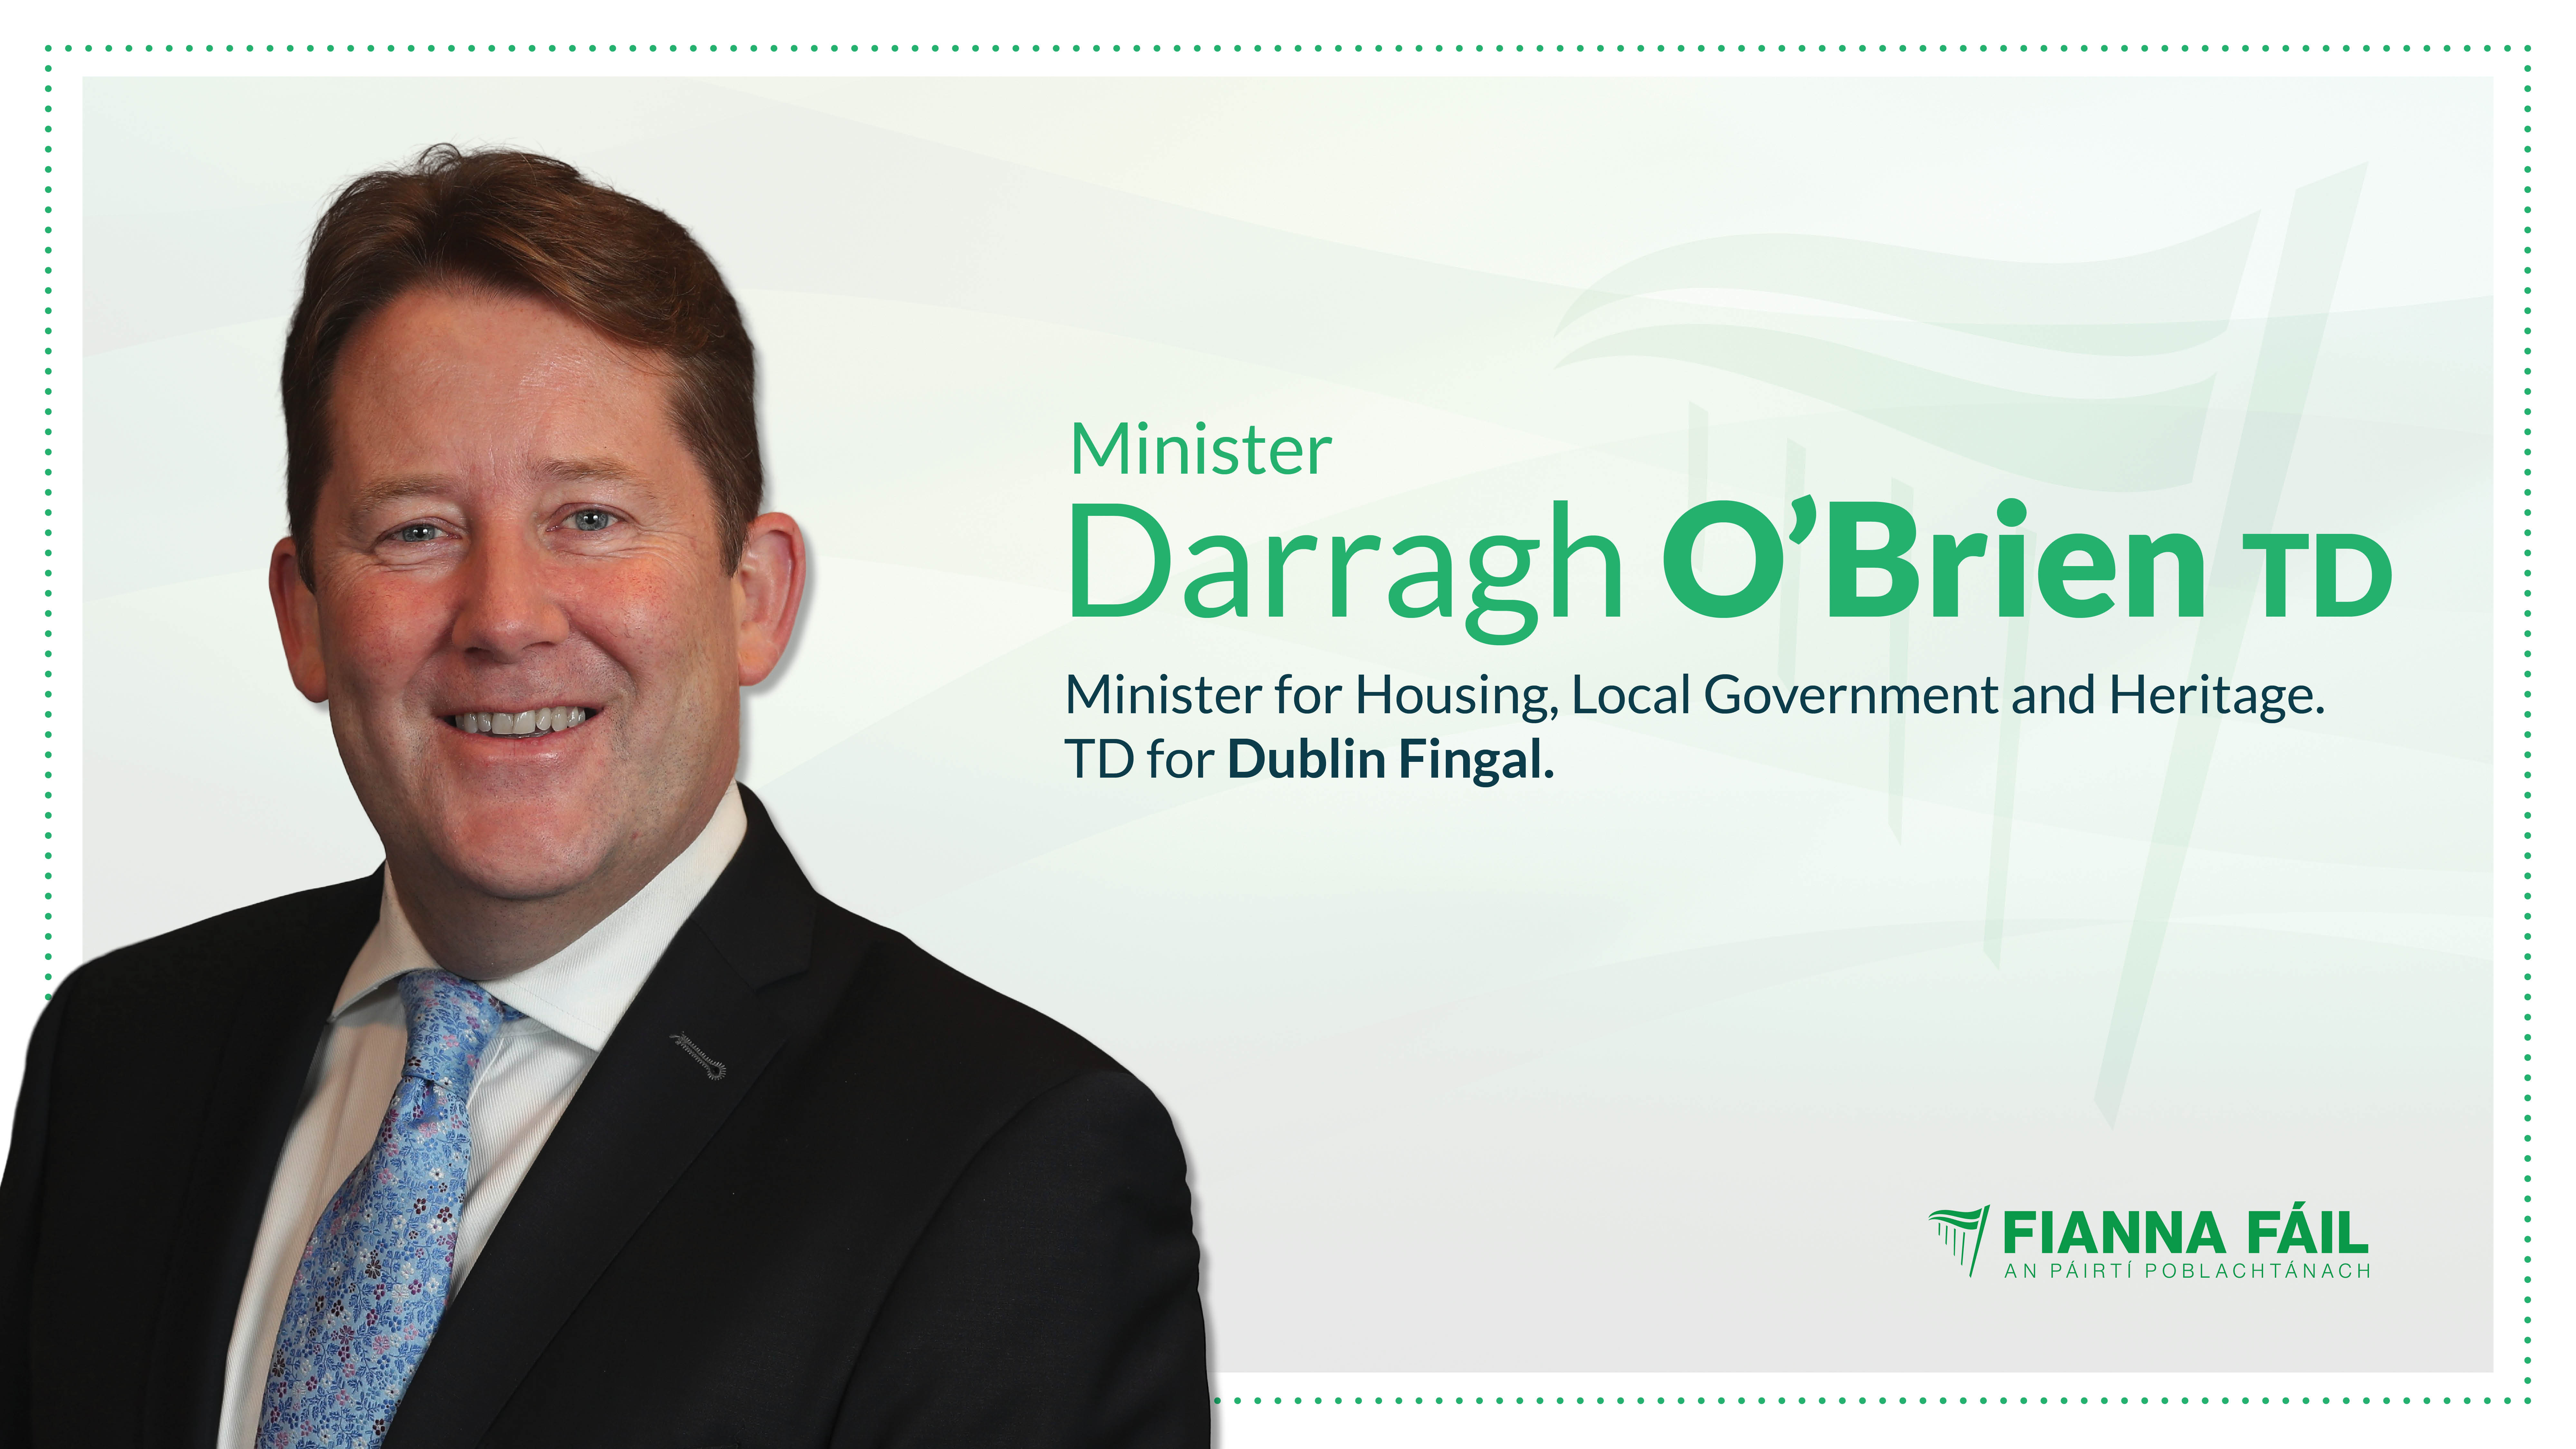 Extra Funding for Local Authorities Covid-19 Response - Minister O'Brien